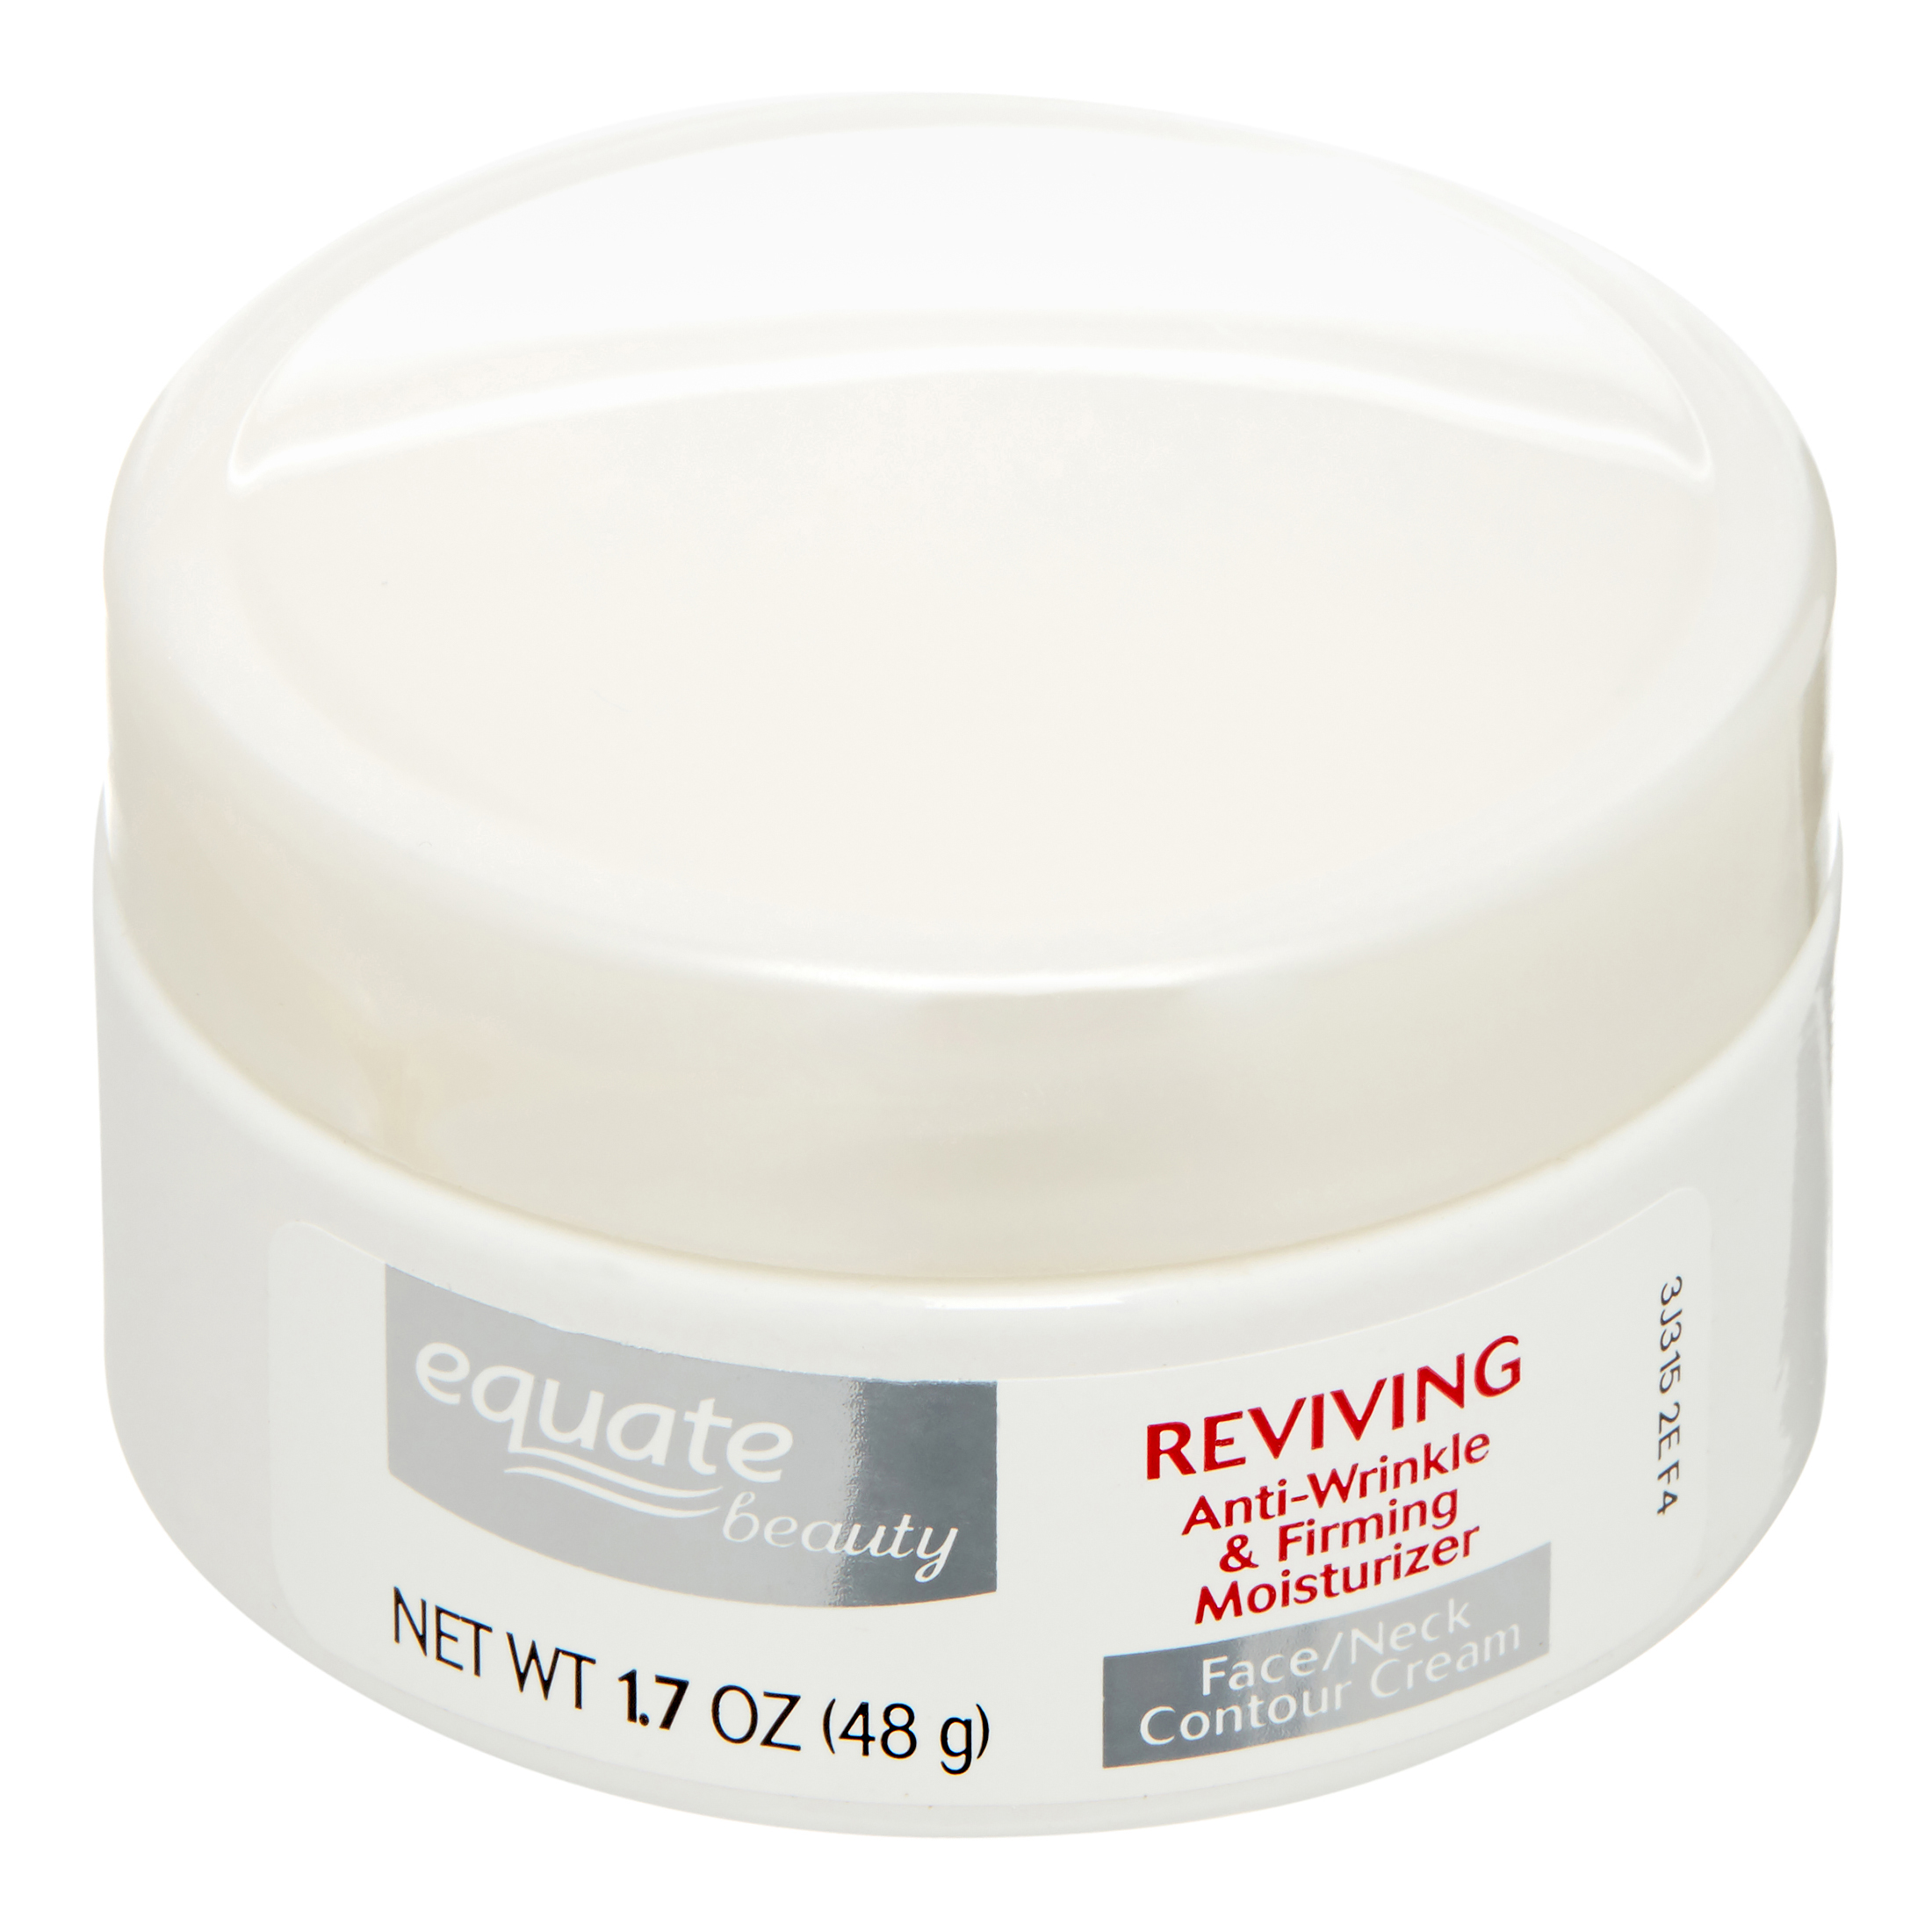 Equate Advanced Firming & Anti-Wrinkle Cream Face and Neck Moisturizer, 1.7oz - image 2 of 9